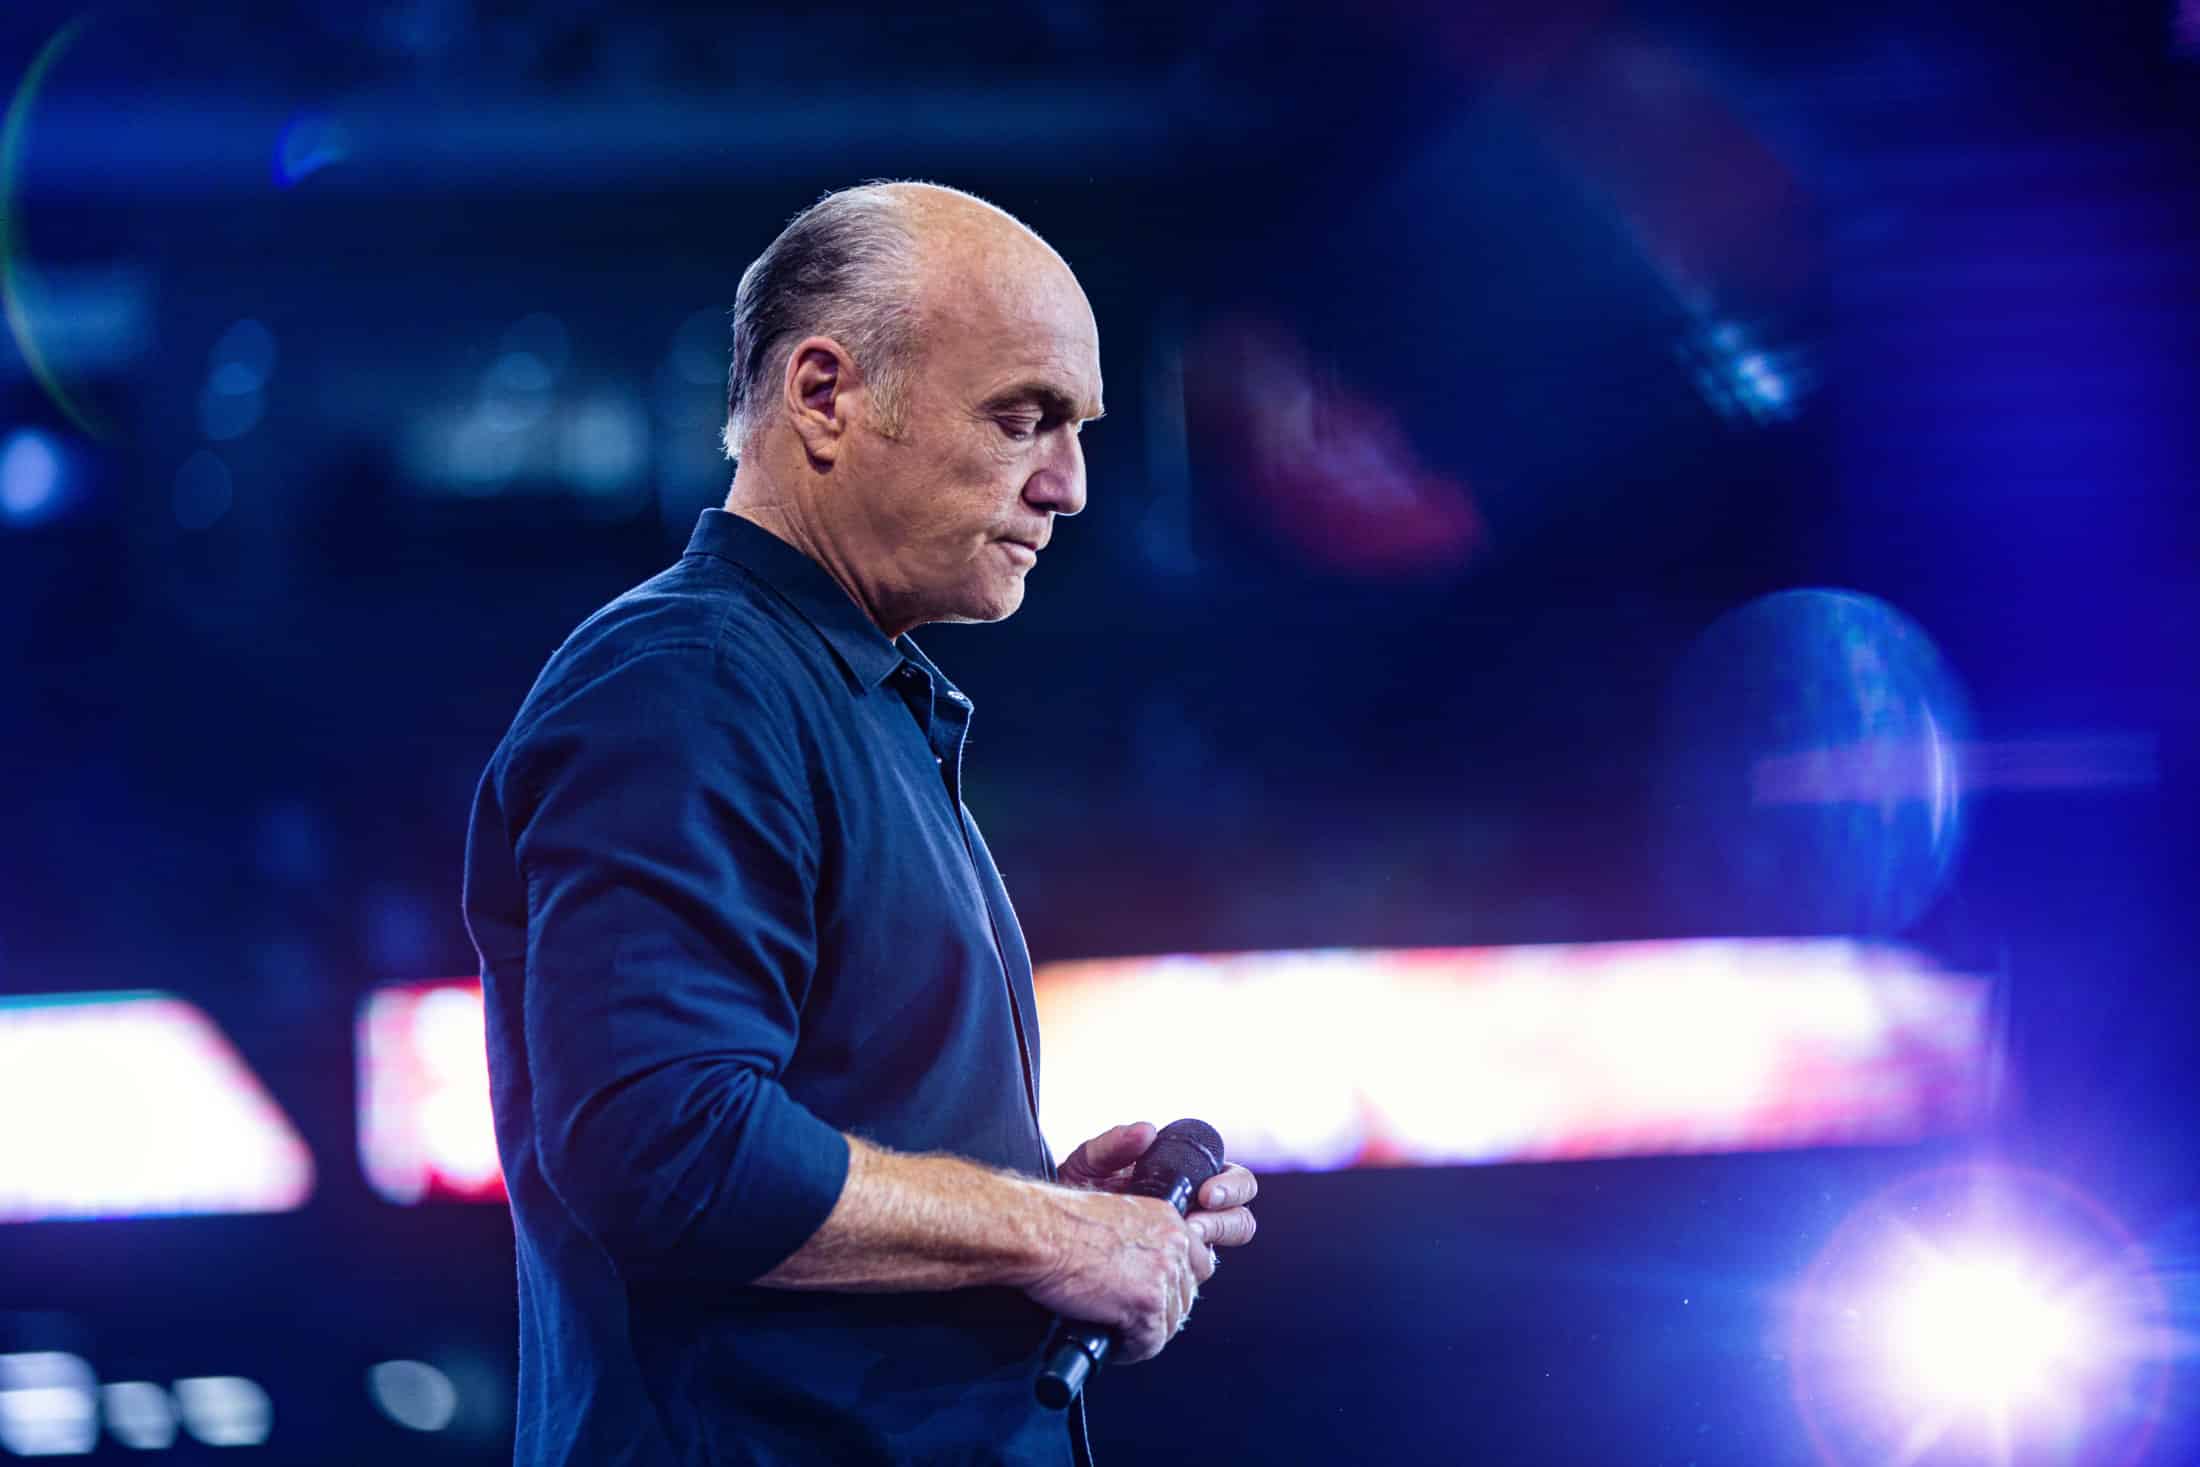 Pastor Greg Laurie Shares Thoughts About Long Life, Balding, And Believers’ Eventual Transition Into Heaven